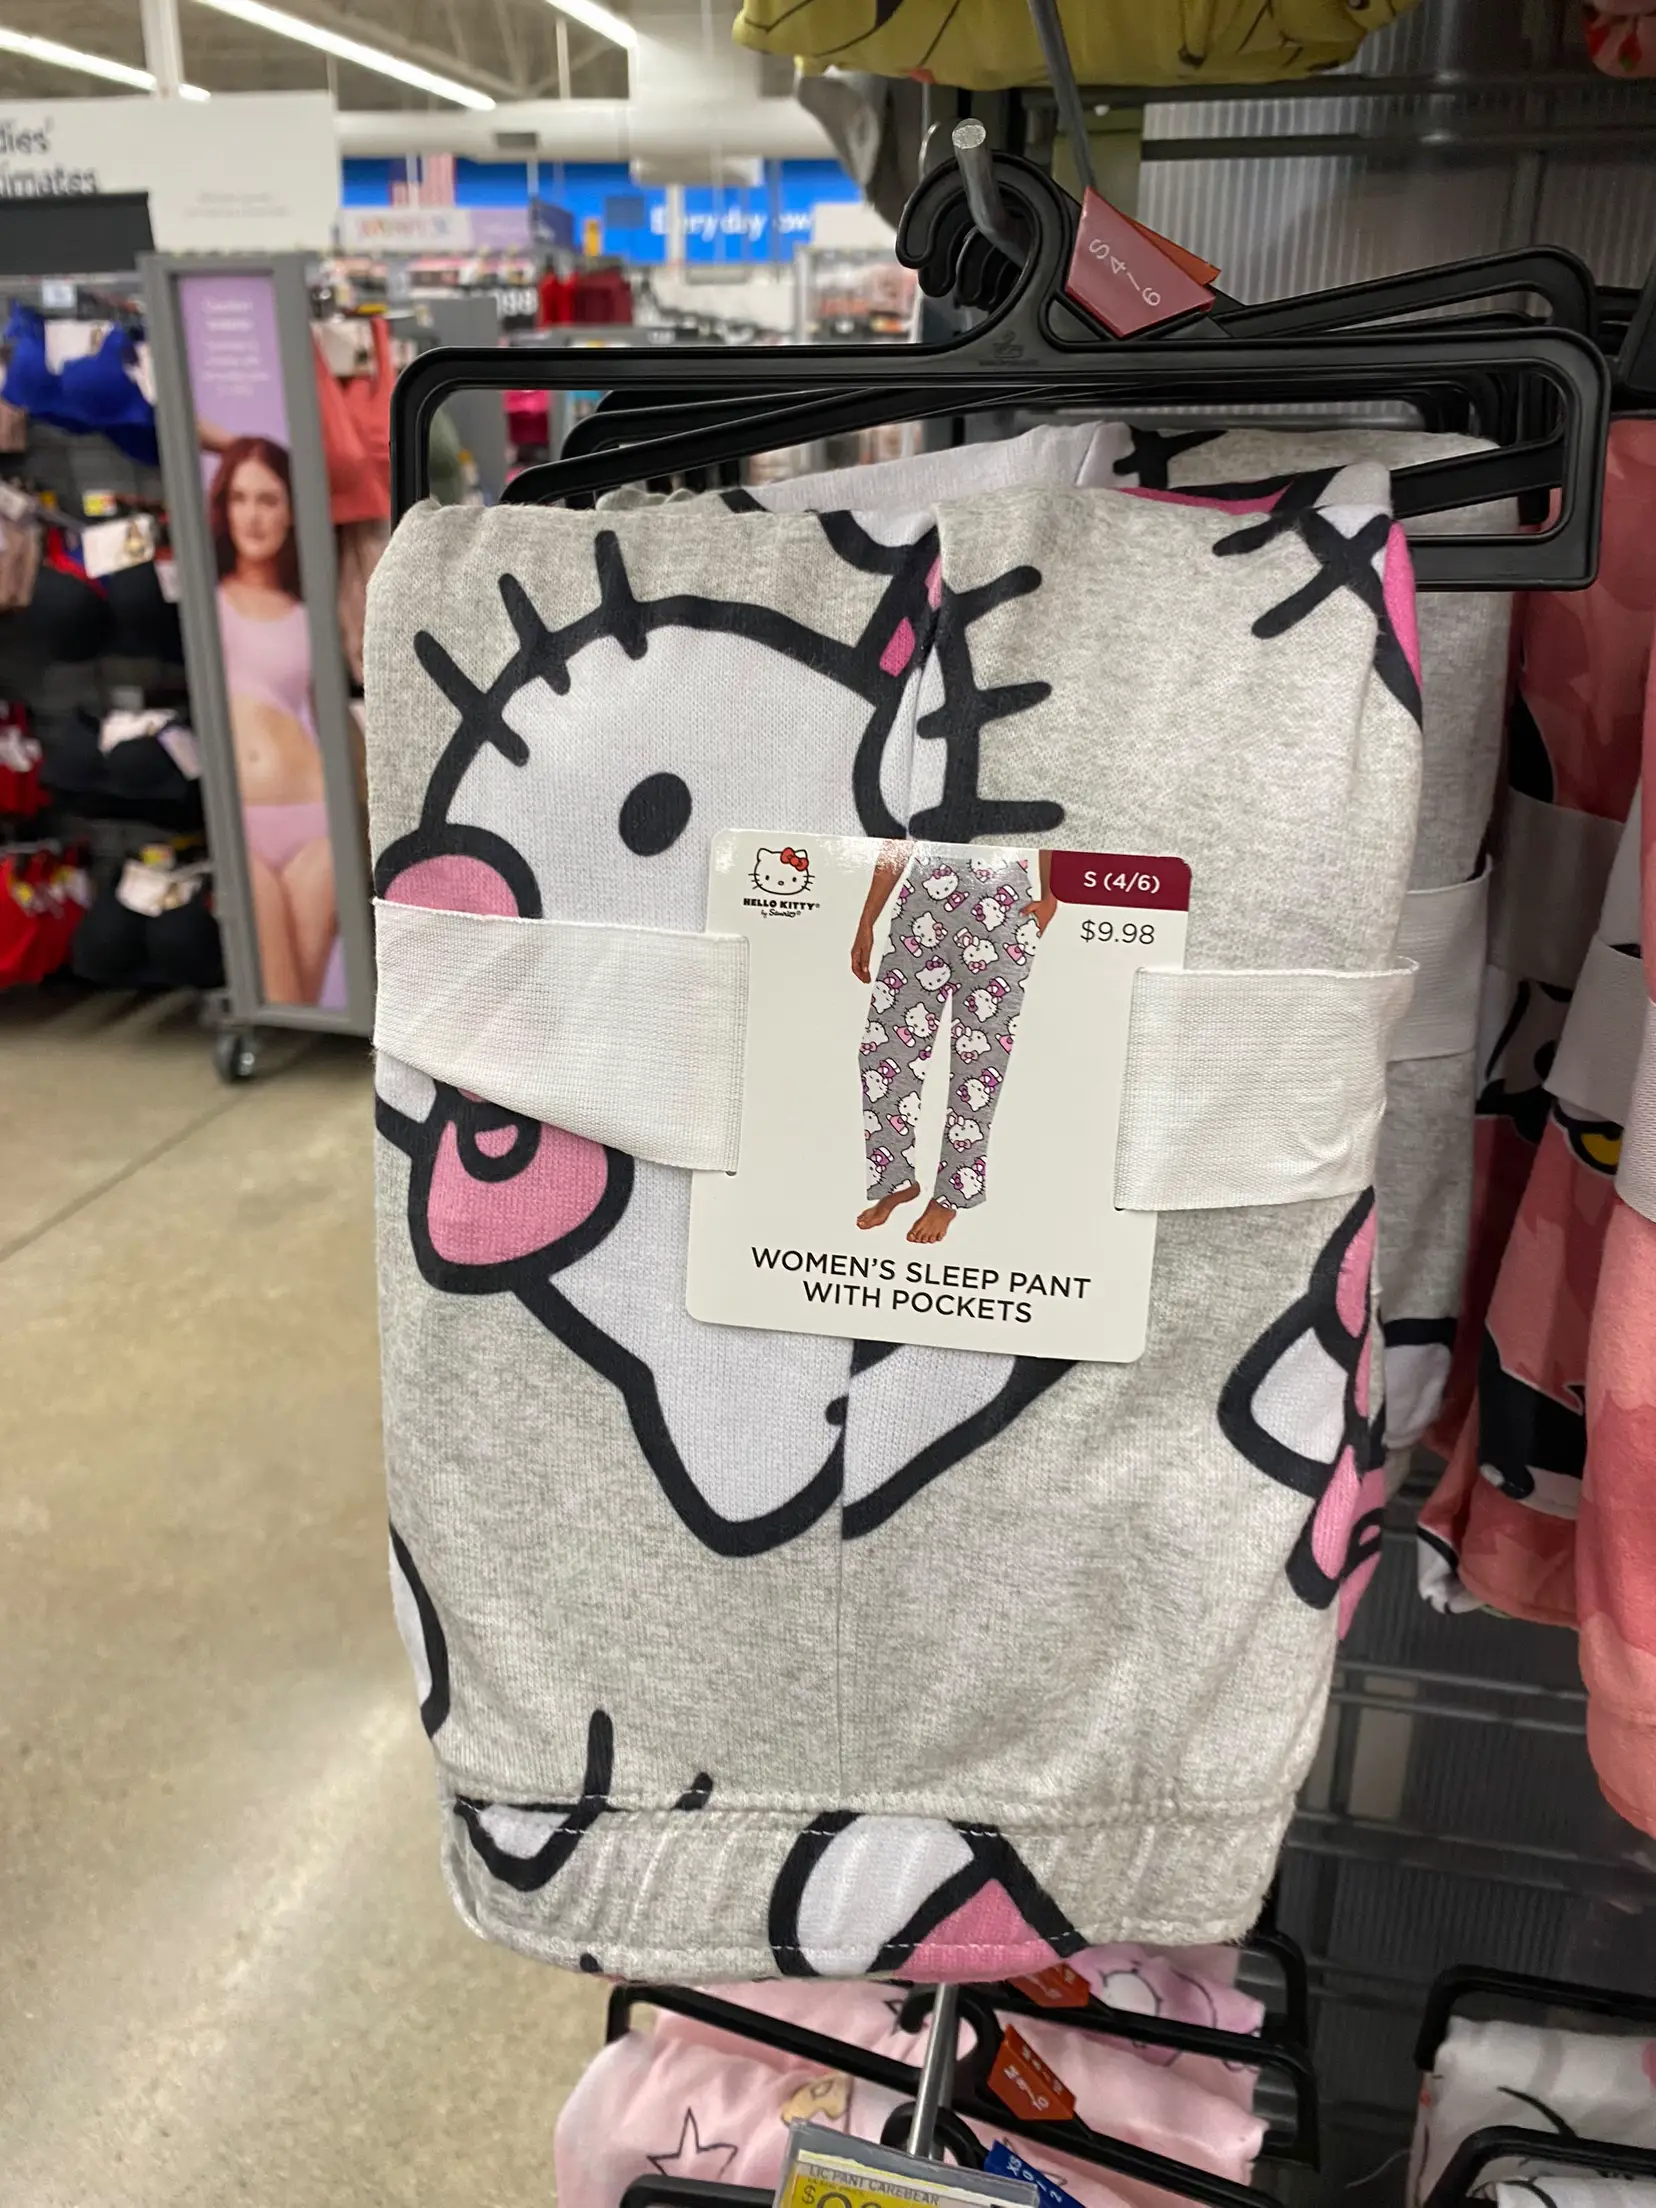 Hello Kitty fuzzy pajama pants at on walmart online?!?!? What?!? #fyp